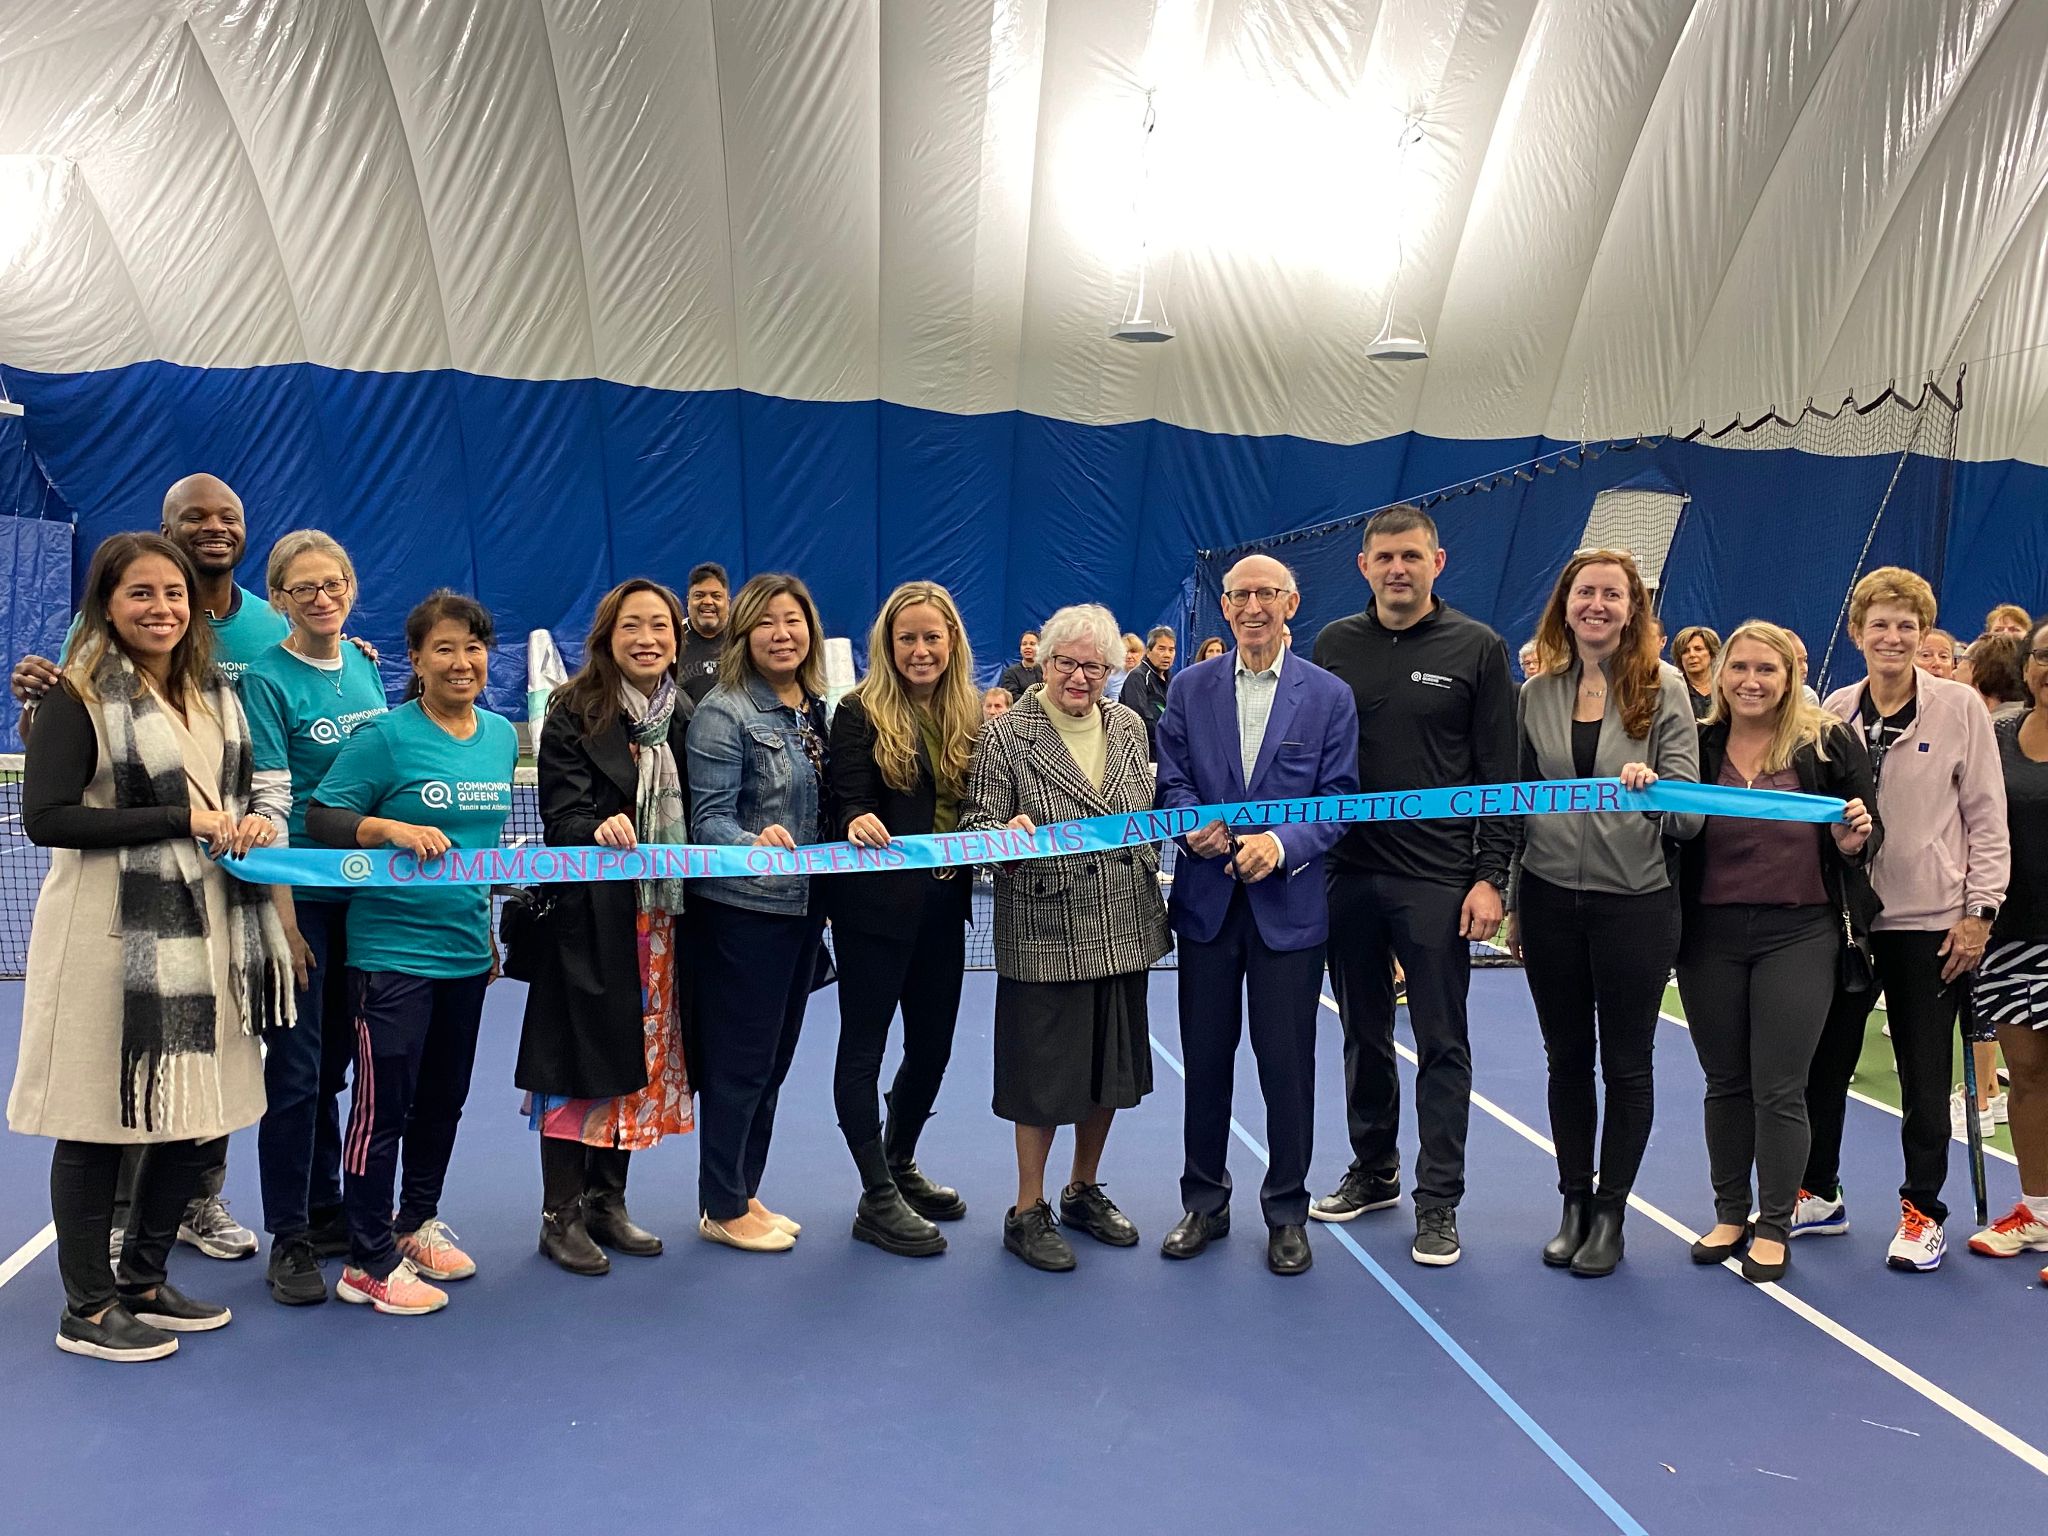 Commonpoint Queens Tennis and Athletic Center officially opens in Alley